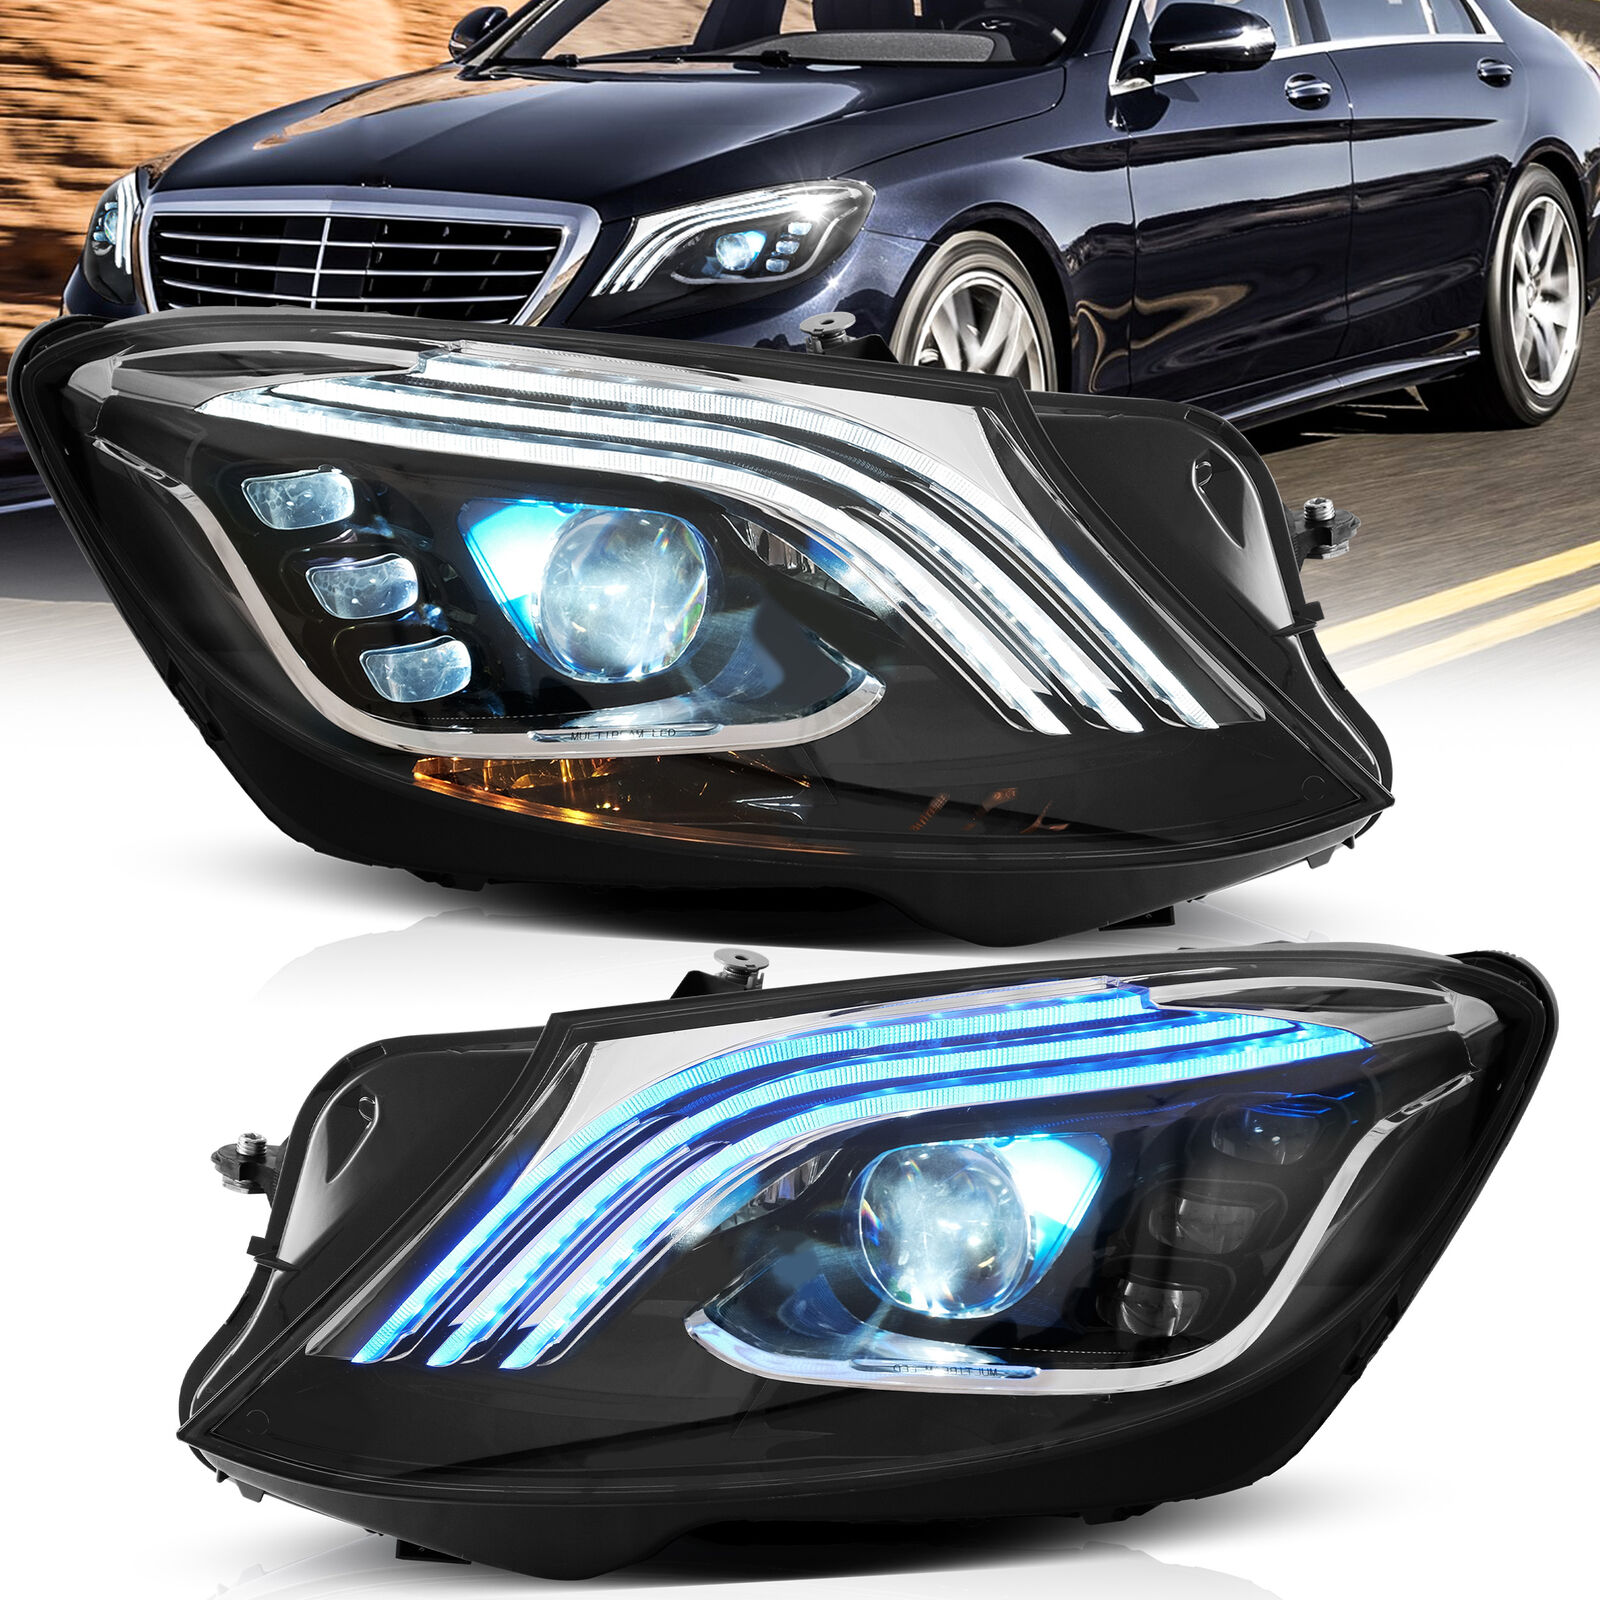 VLAND For 2014-17 Mercedez Benz S-Class LED Headlights DRL Sets w/Animation Pair